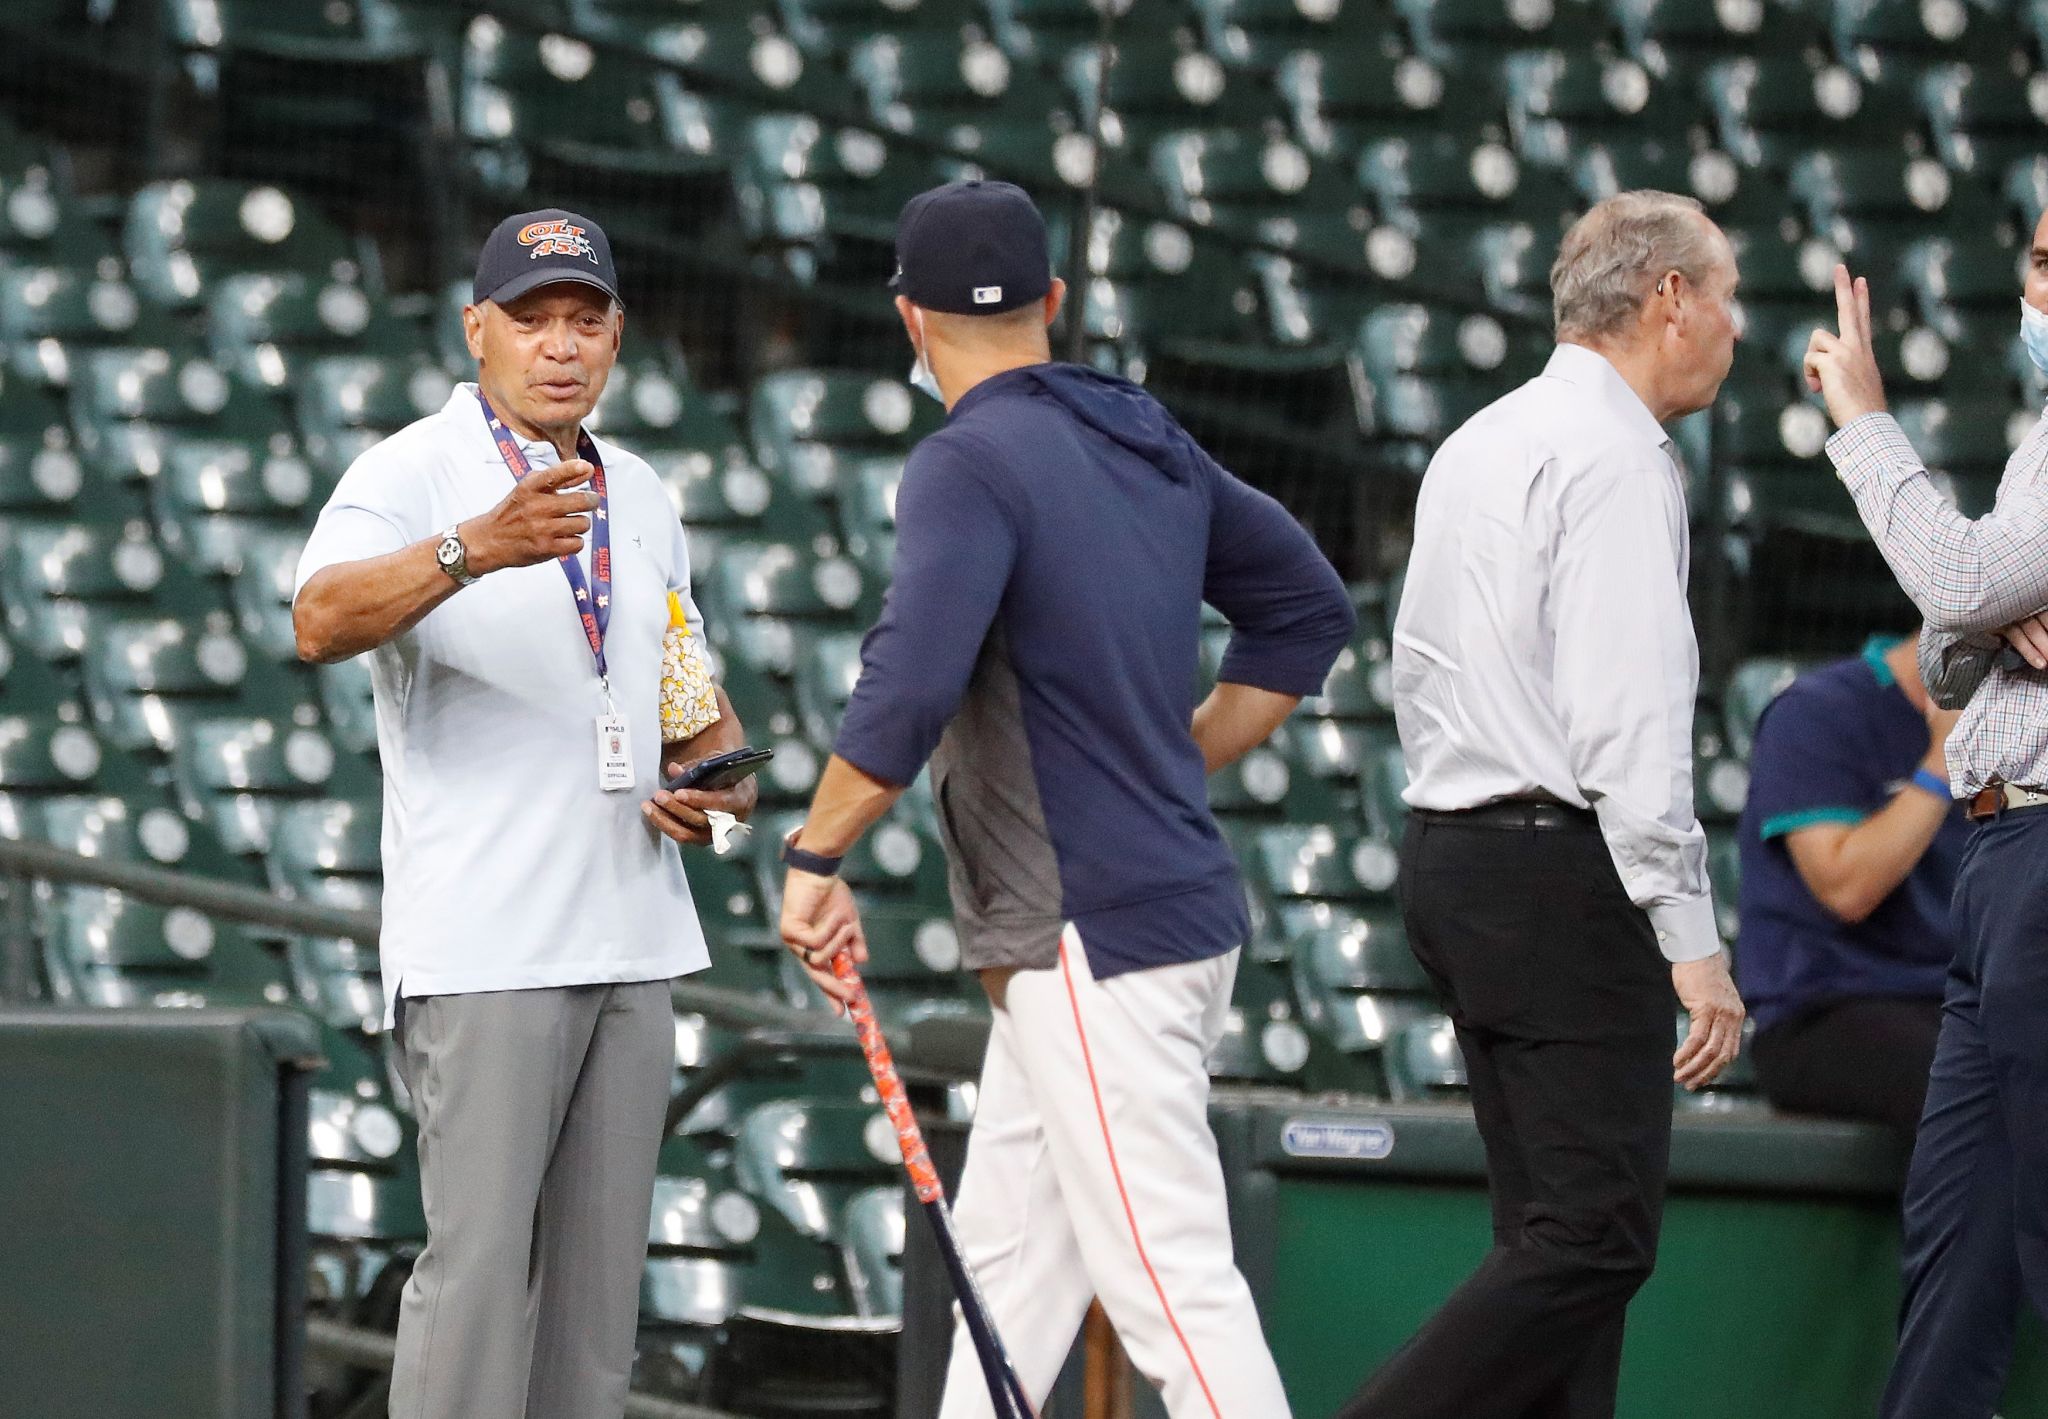 Sorry, Yankees fans: Reggie Jackson works for the Astros now